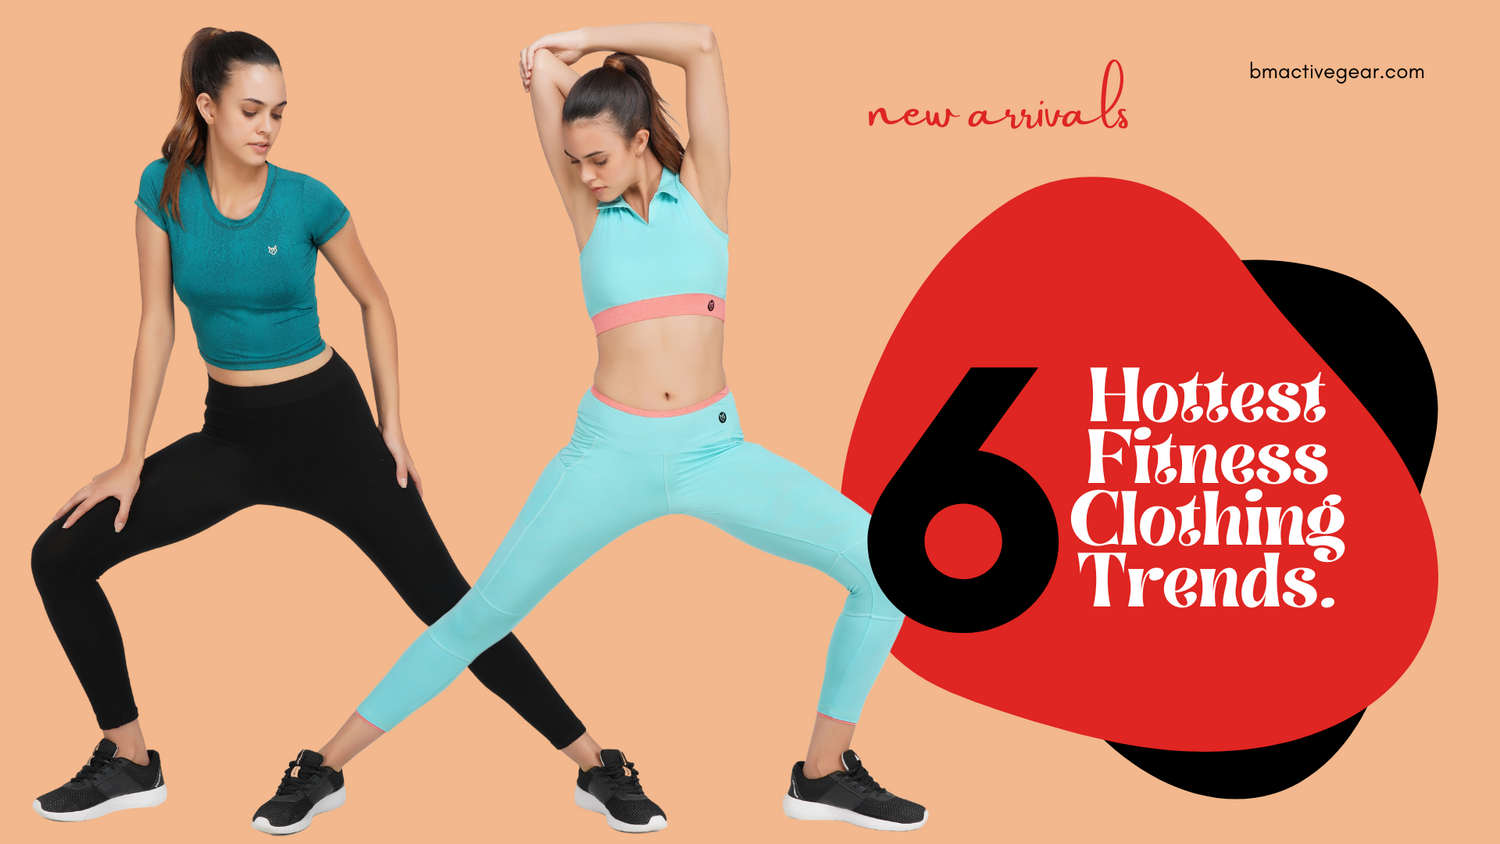 6 Hottest Fitness Clothing Trends